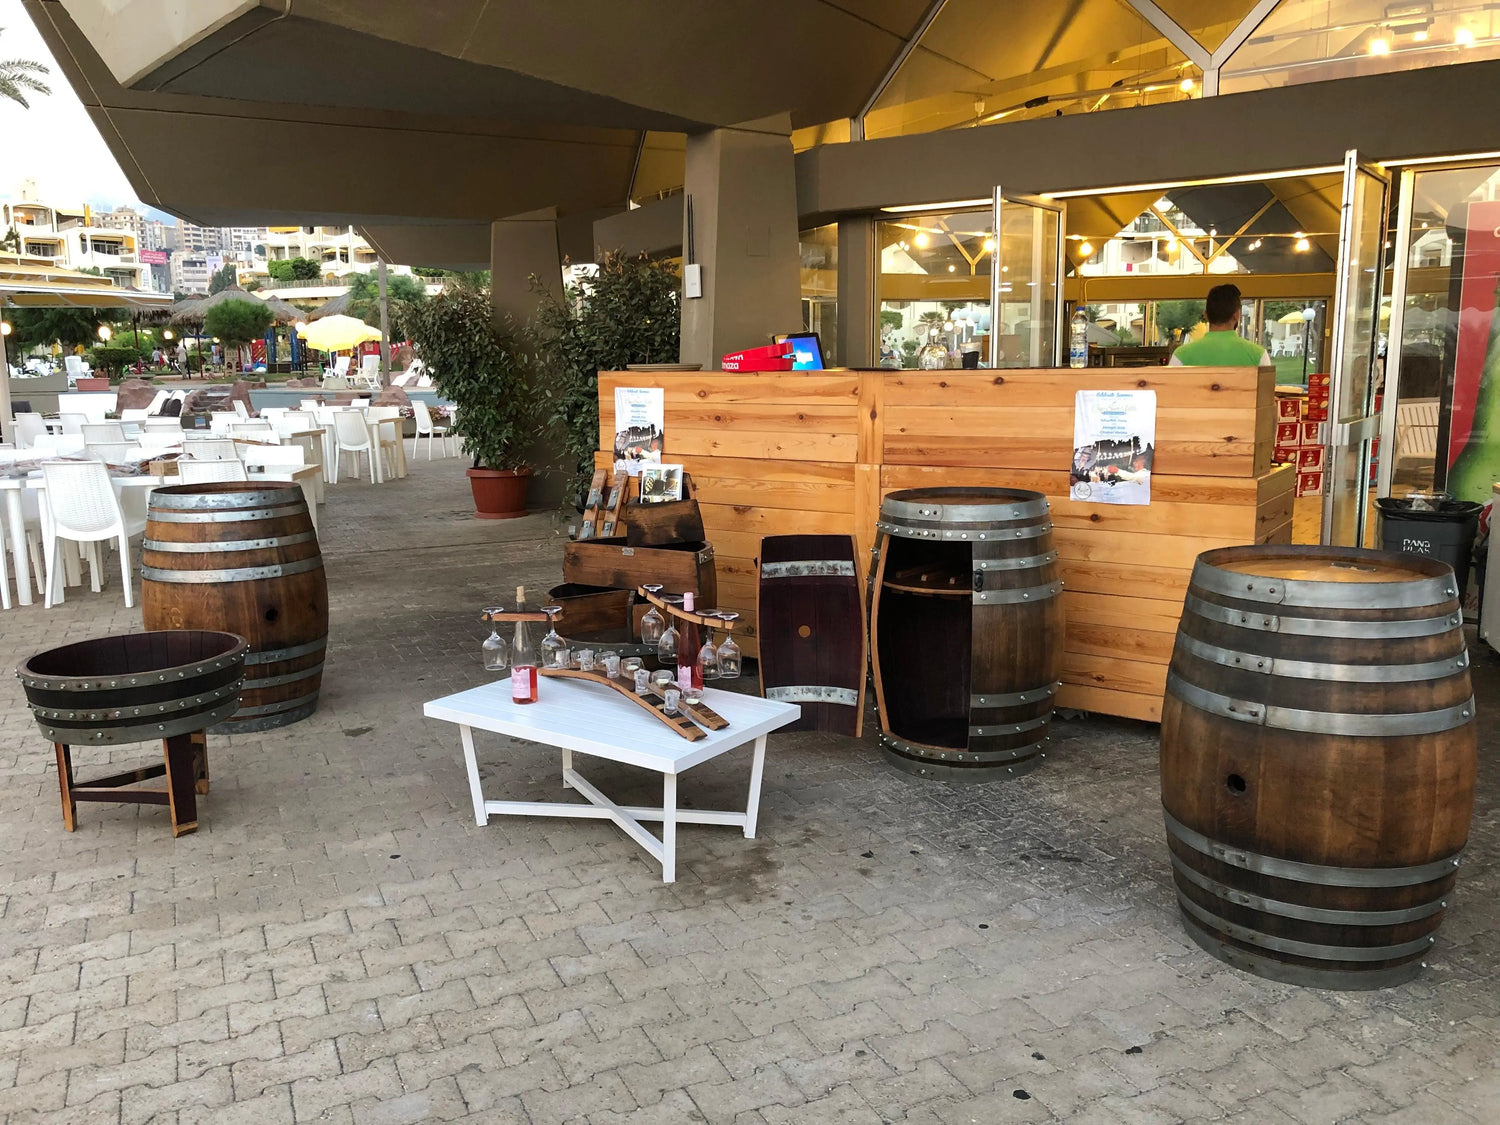 How to Transform Your Outdoor Patio Into a Unique and Stylish Space With Wine Barrel Furniture - Oak Wood Wine Barrels